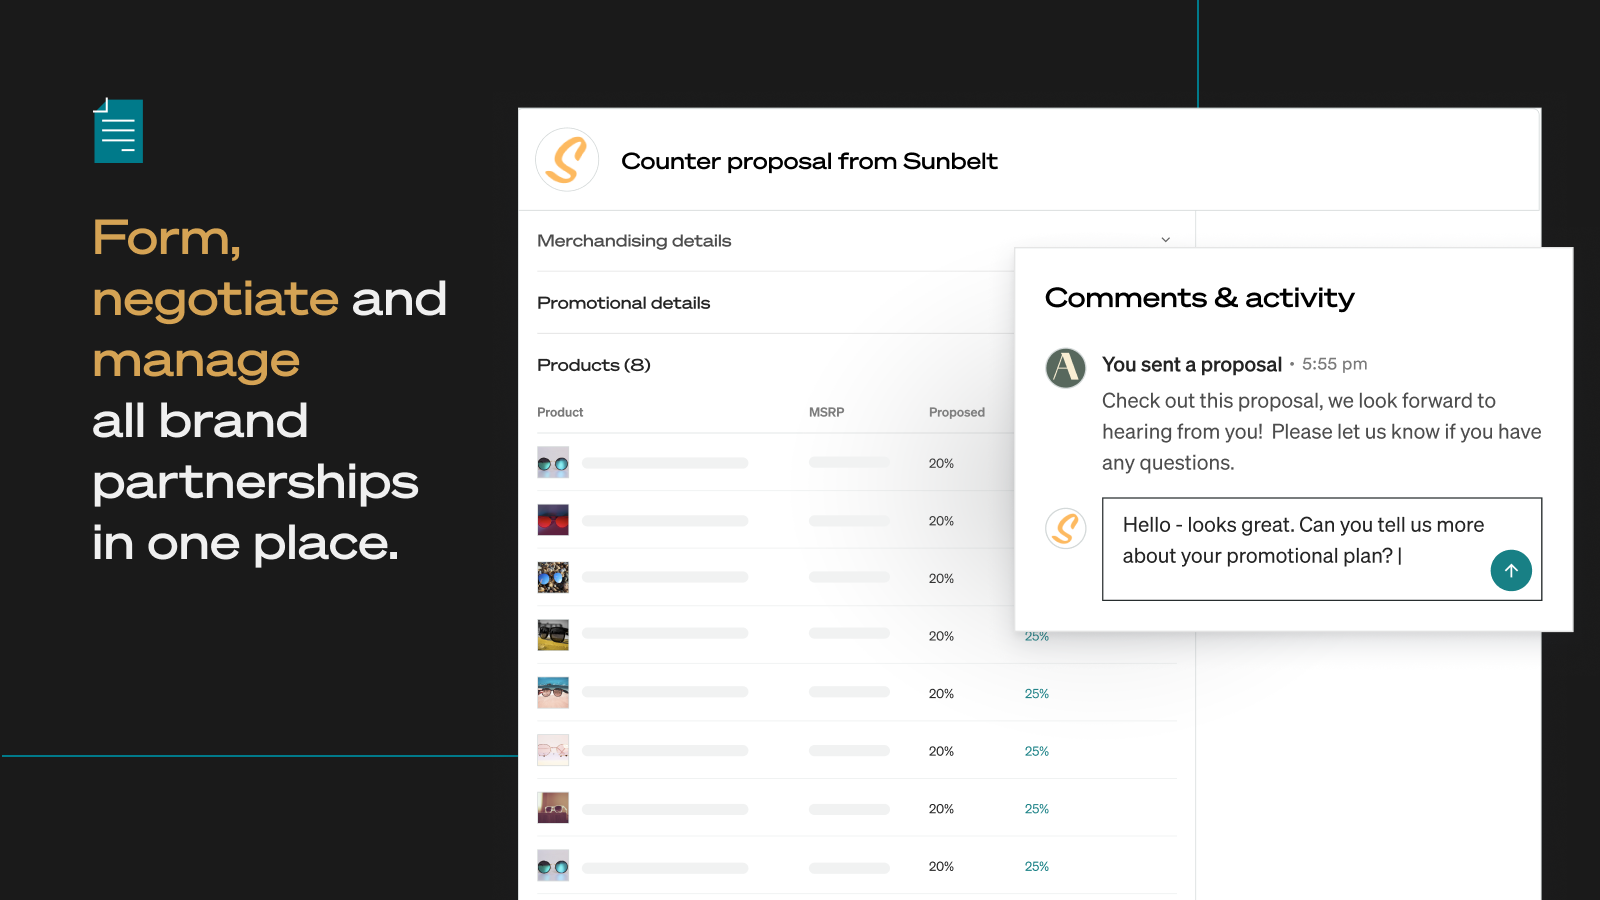 Form, negotiate and manage all brand partnerships in one place.